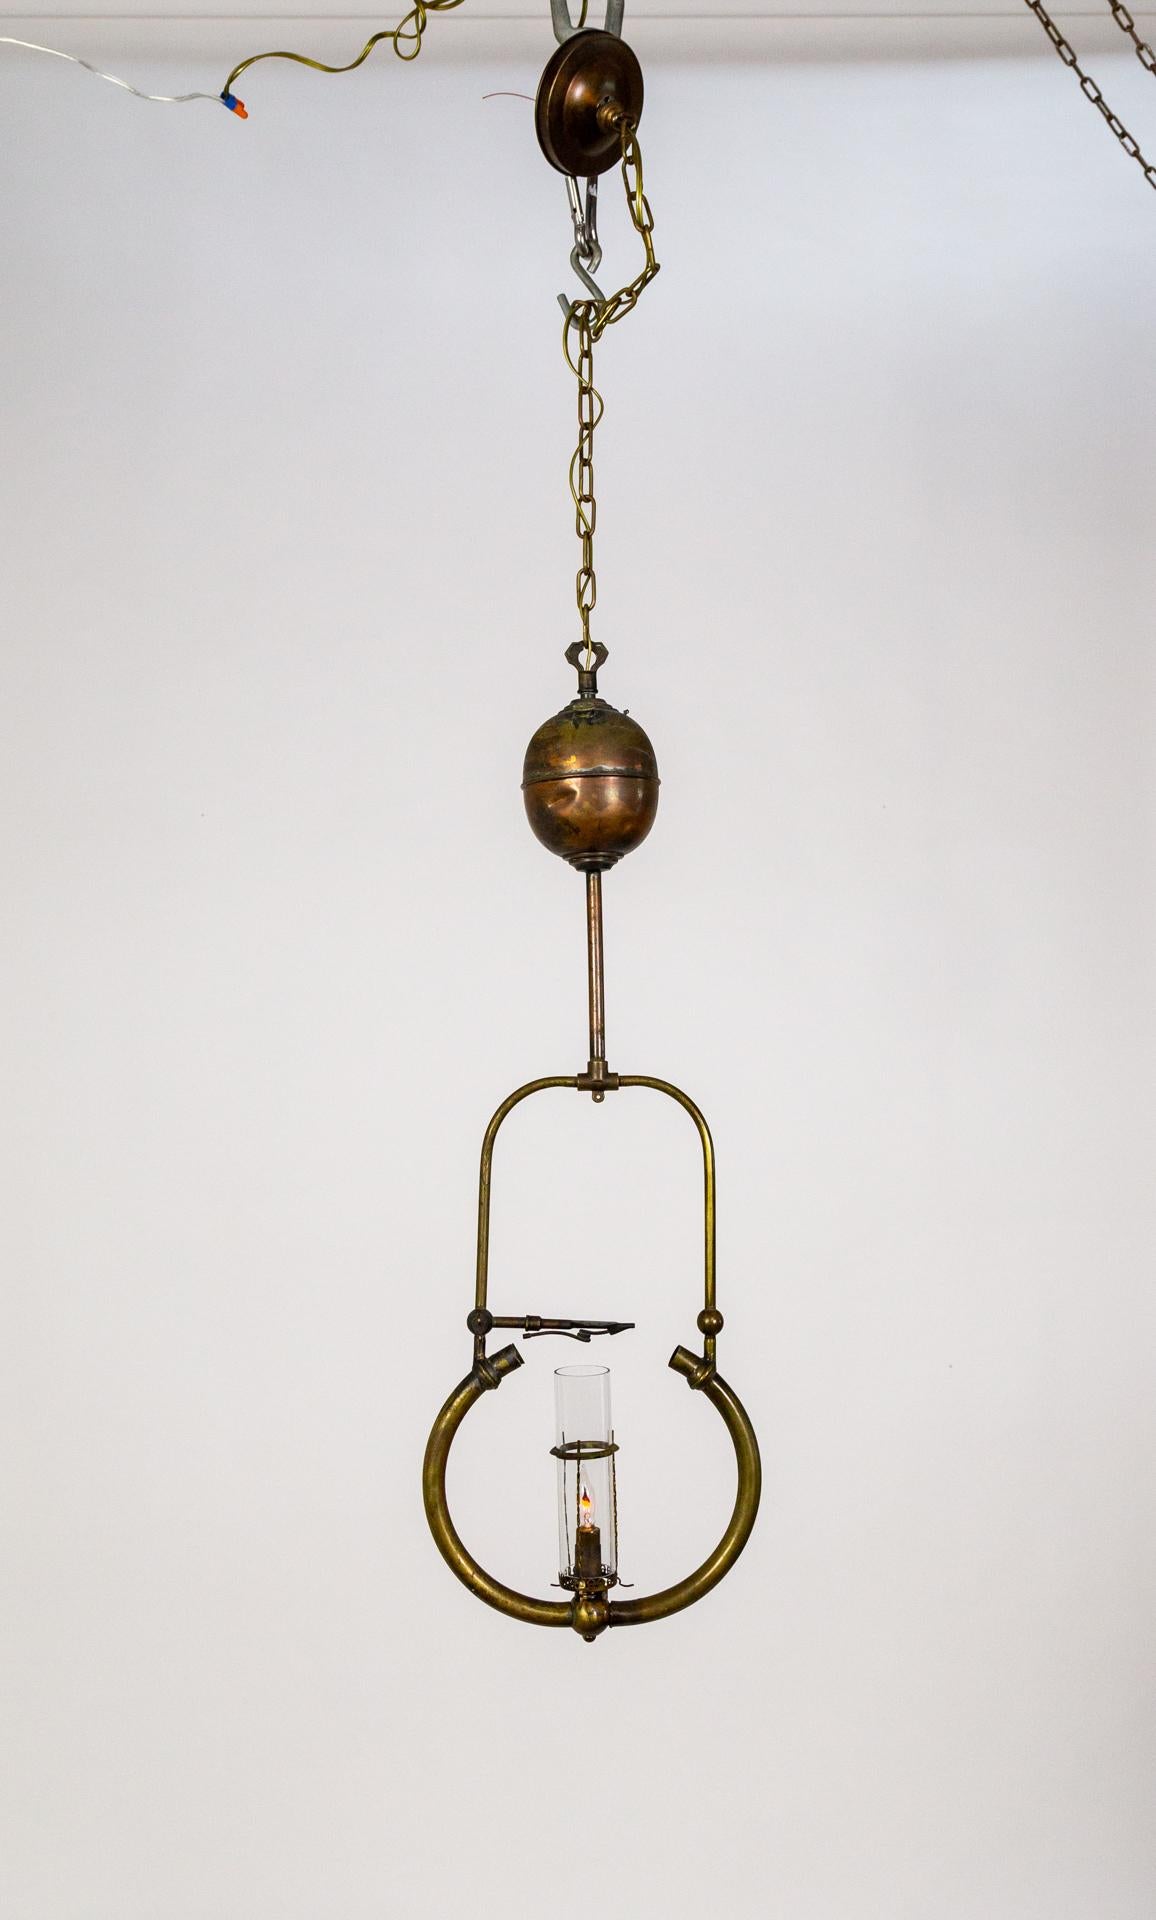 An antique, hanging pressure-style gas lamp.  Comprised of a brass harp structure topped with a stem and globular font, hanging by a chain.  It has a narrow cylindrical glass shade and candelabra socket.  Circa 1912. Newly wired.  12